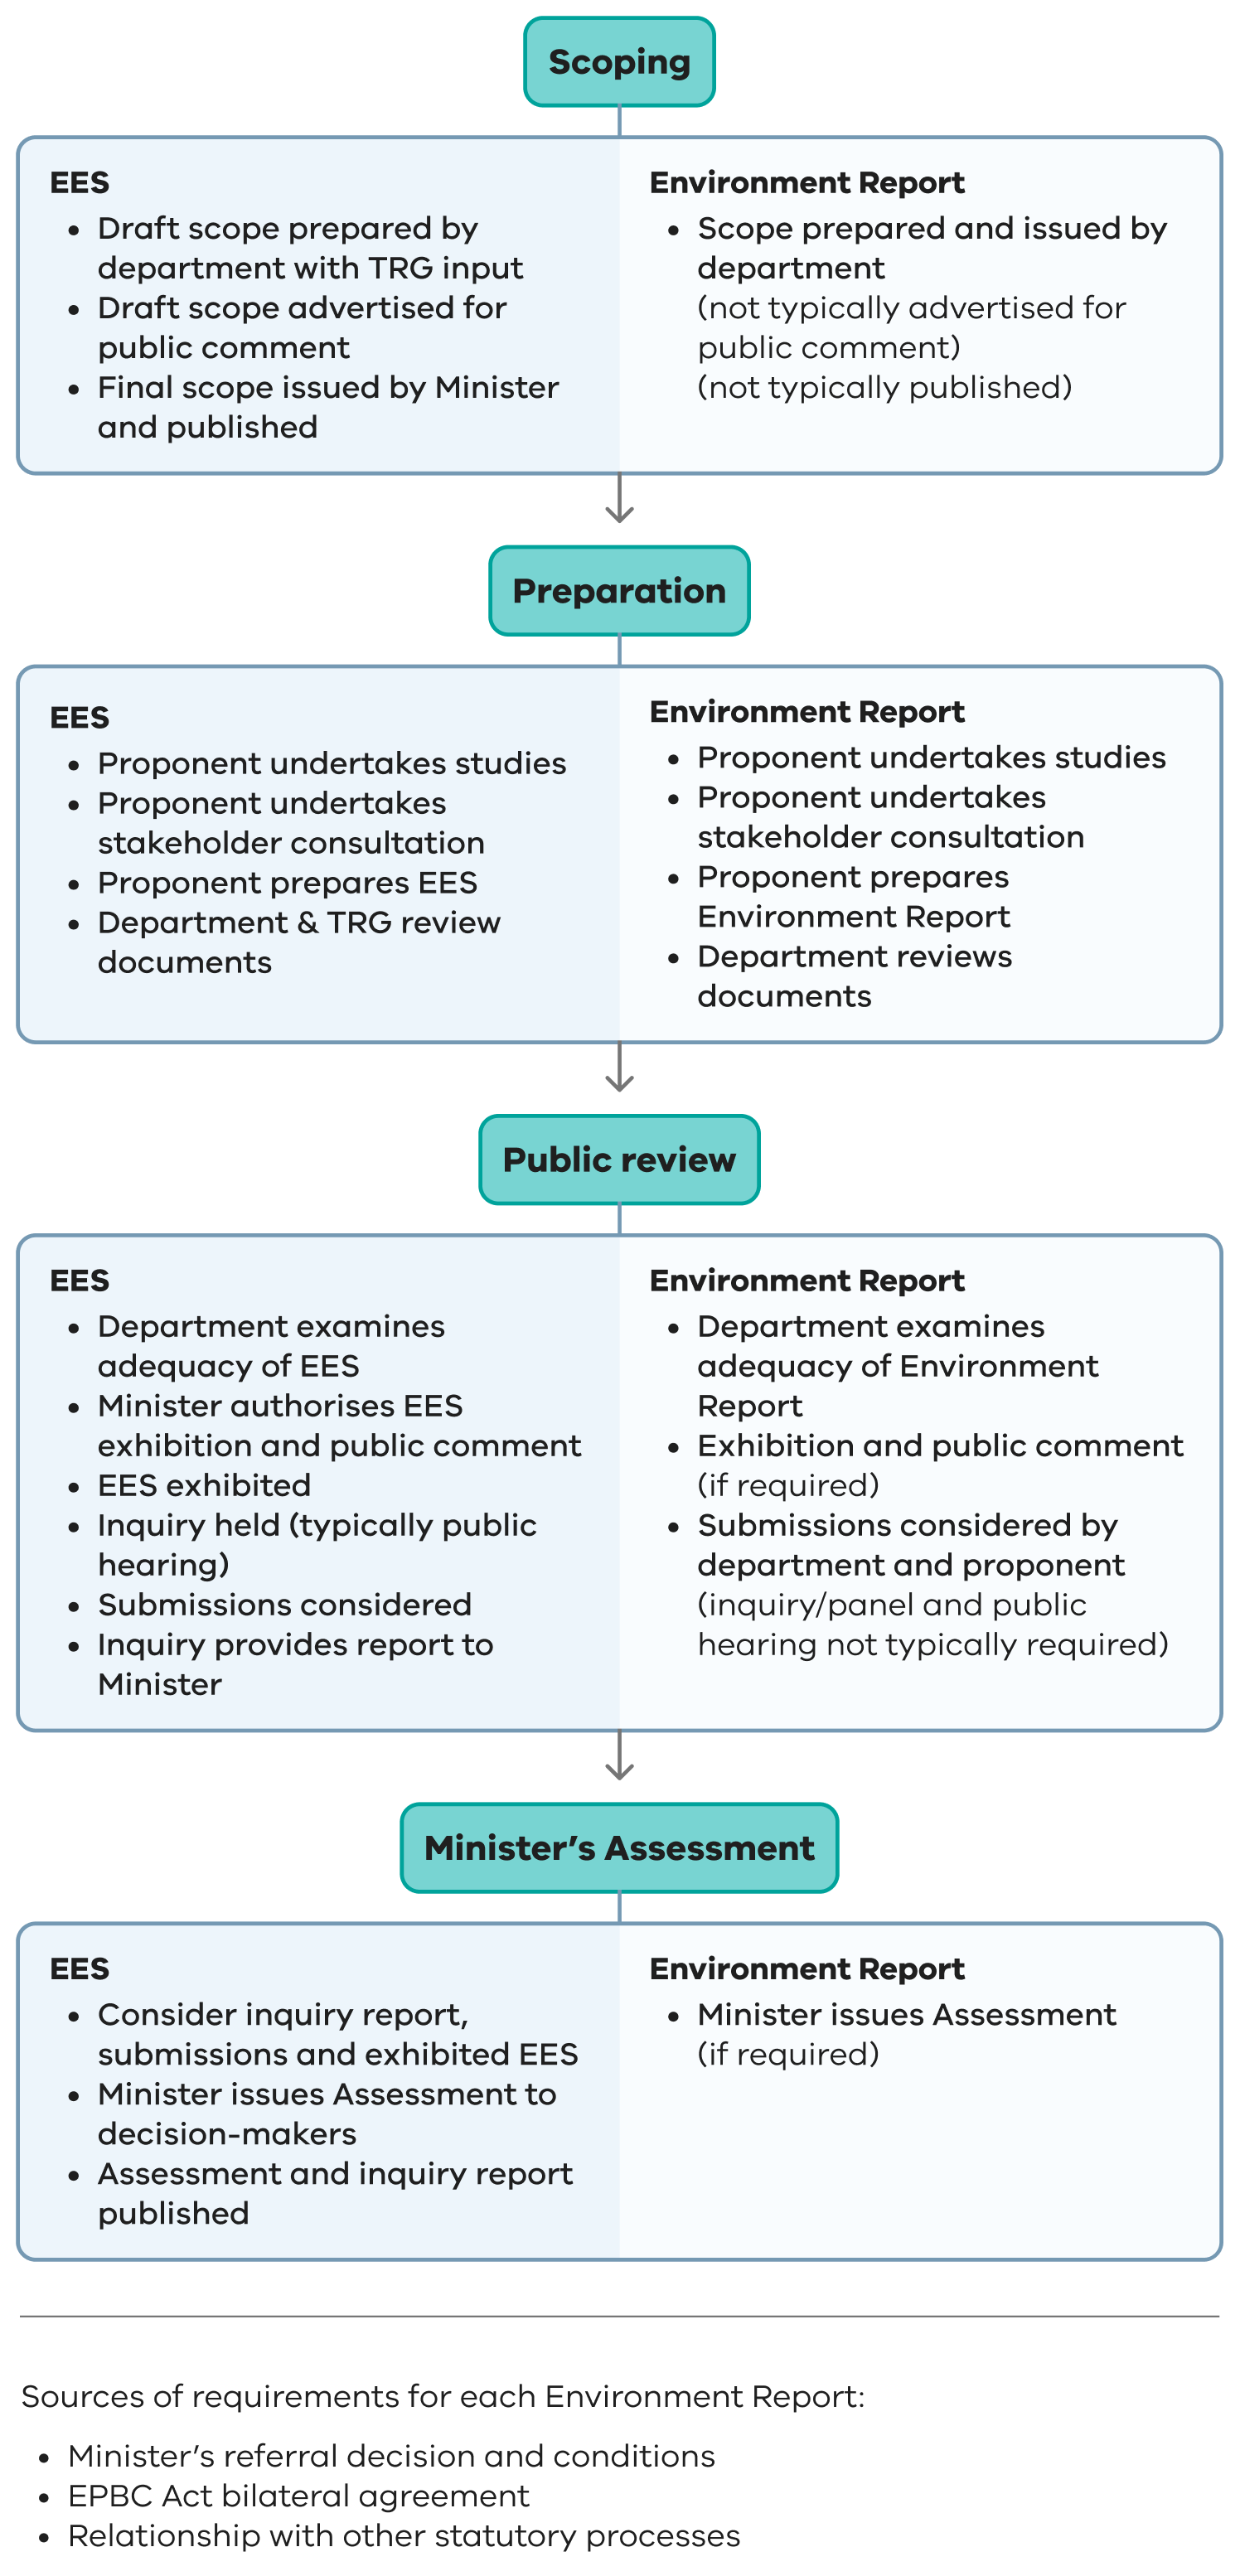 Figure 3. Stages of EES and environment report processes under the Environment Effects Act